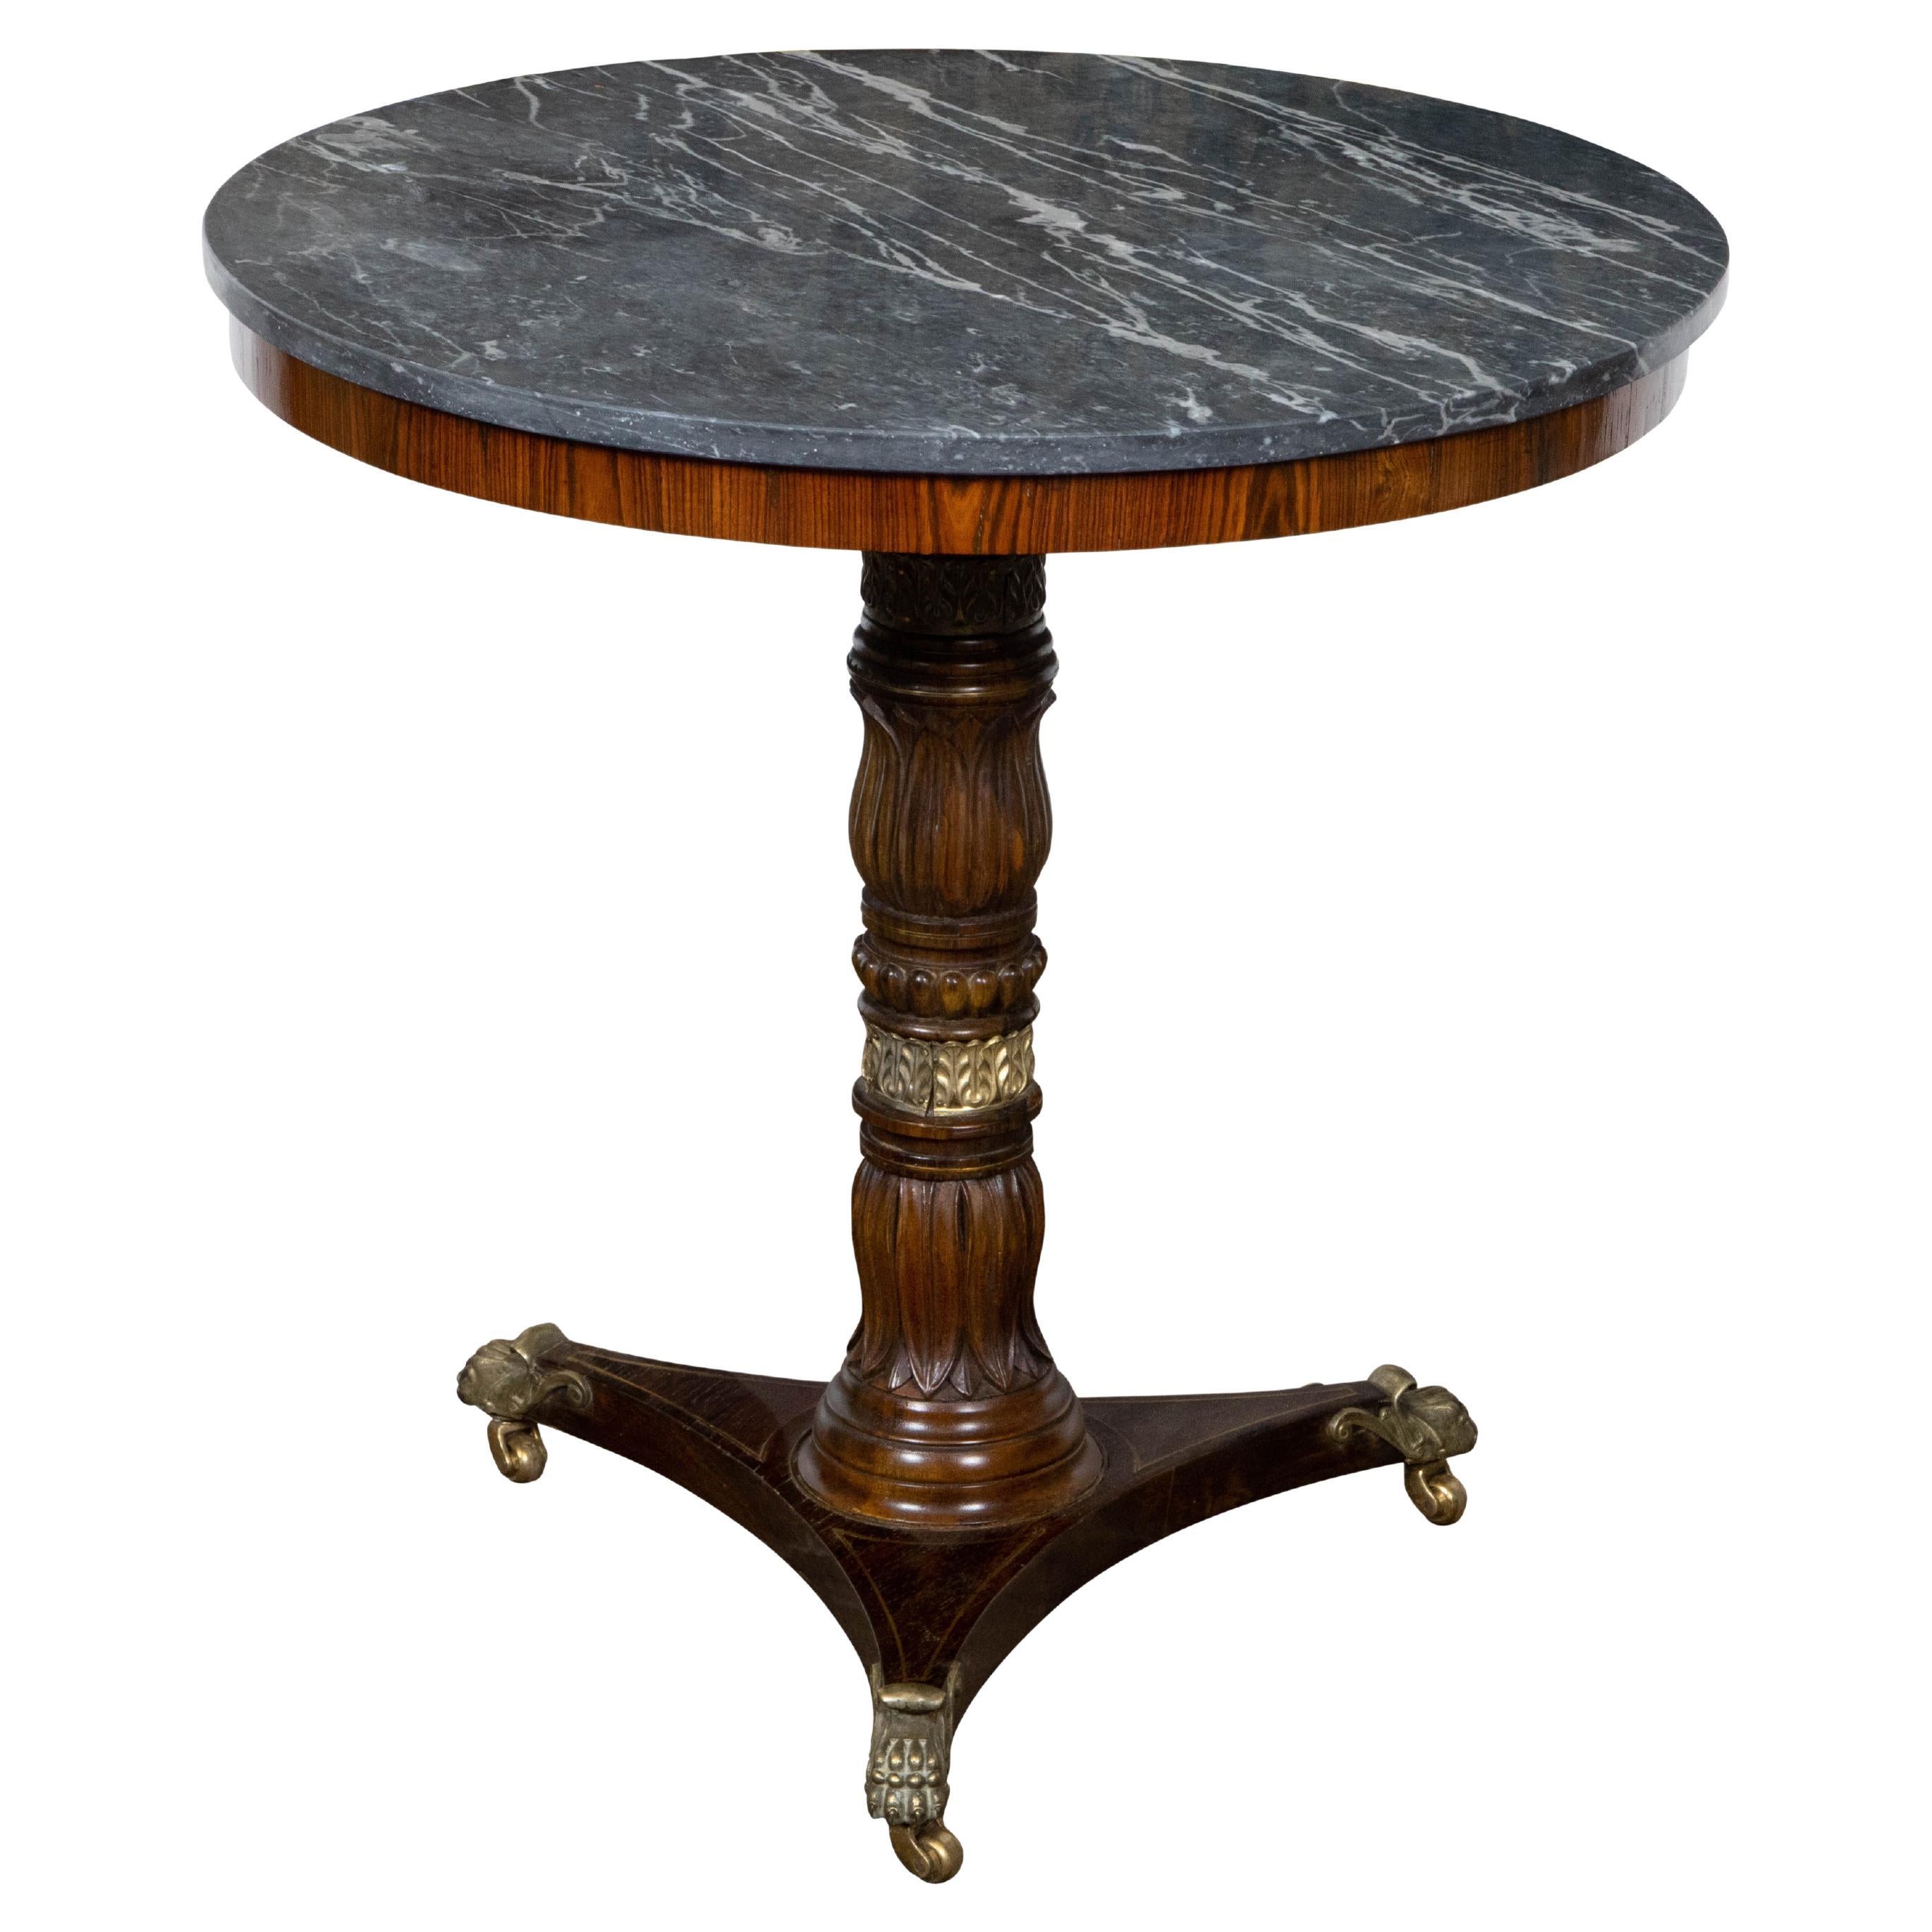 English Regency Period 19th Century Mahogany Side Table with Grey Marble Top For Sale